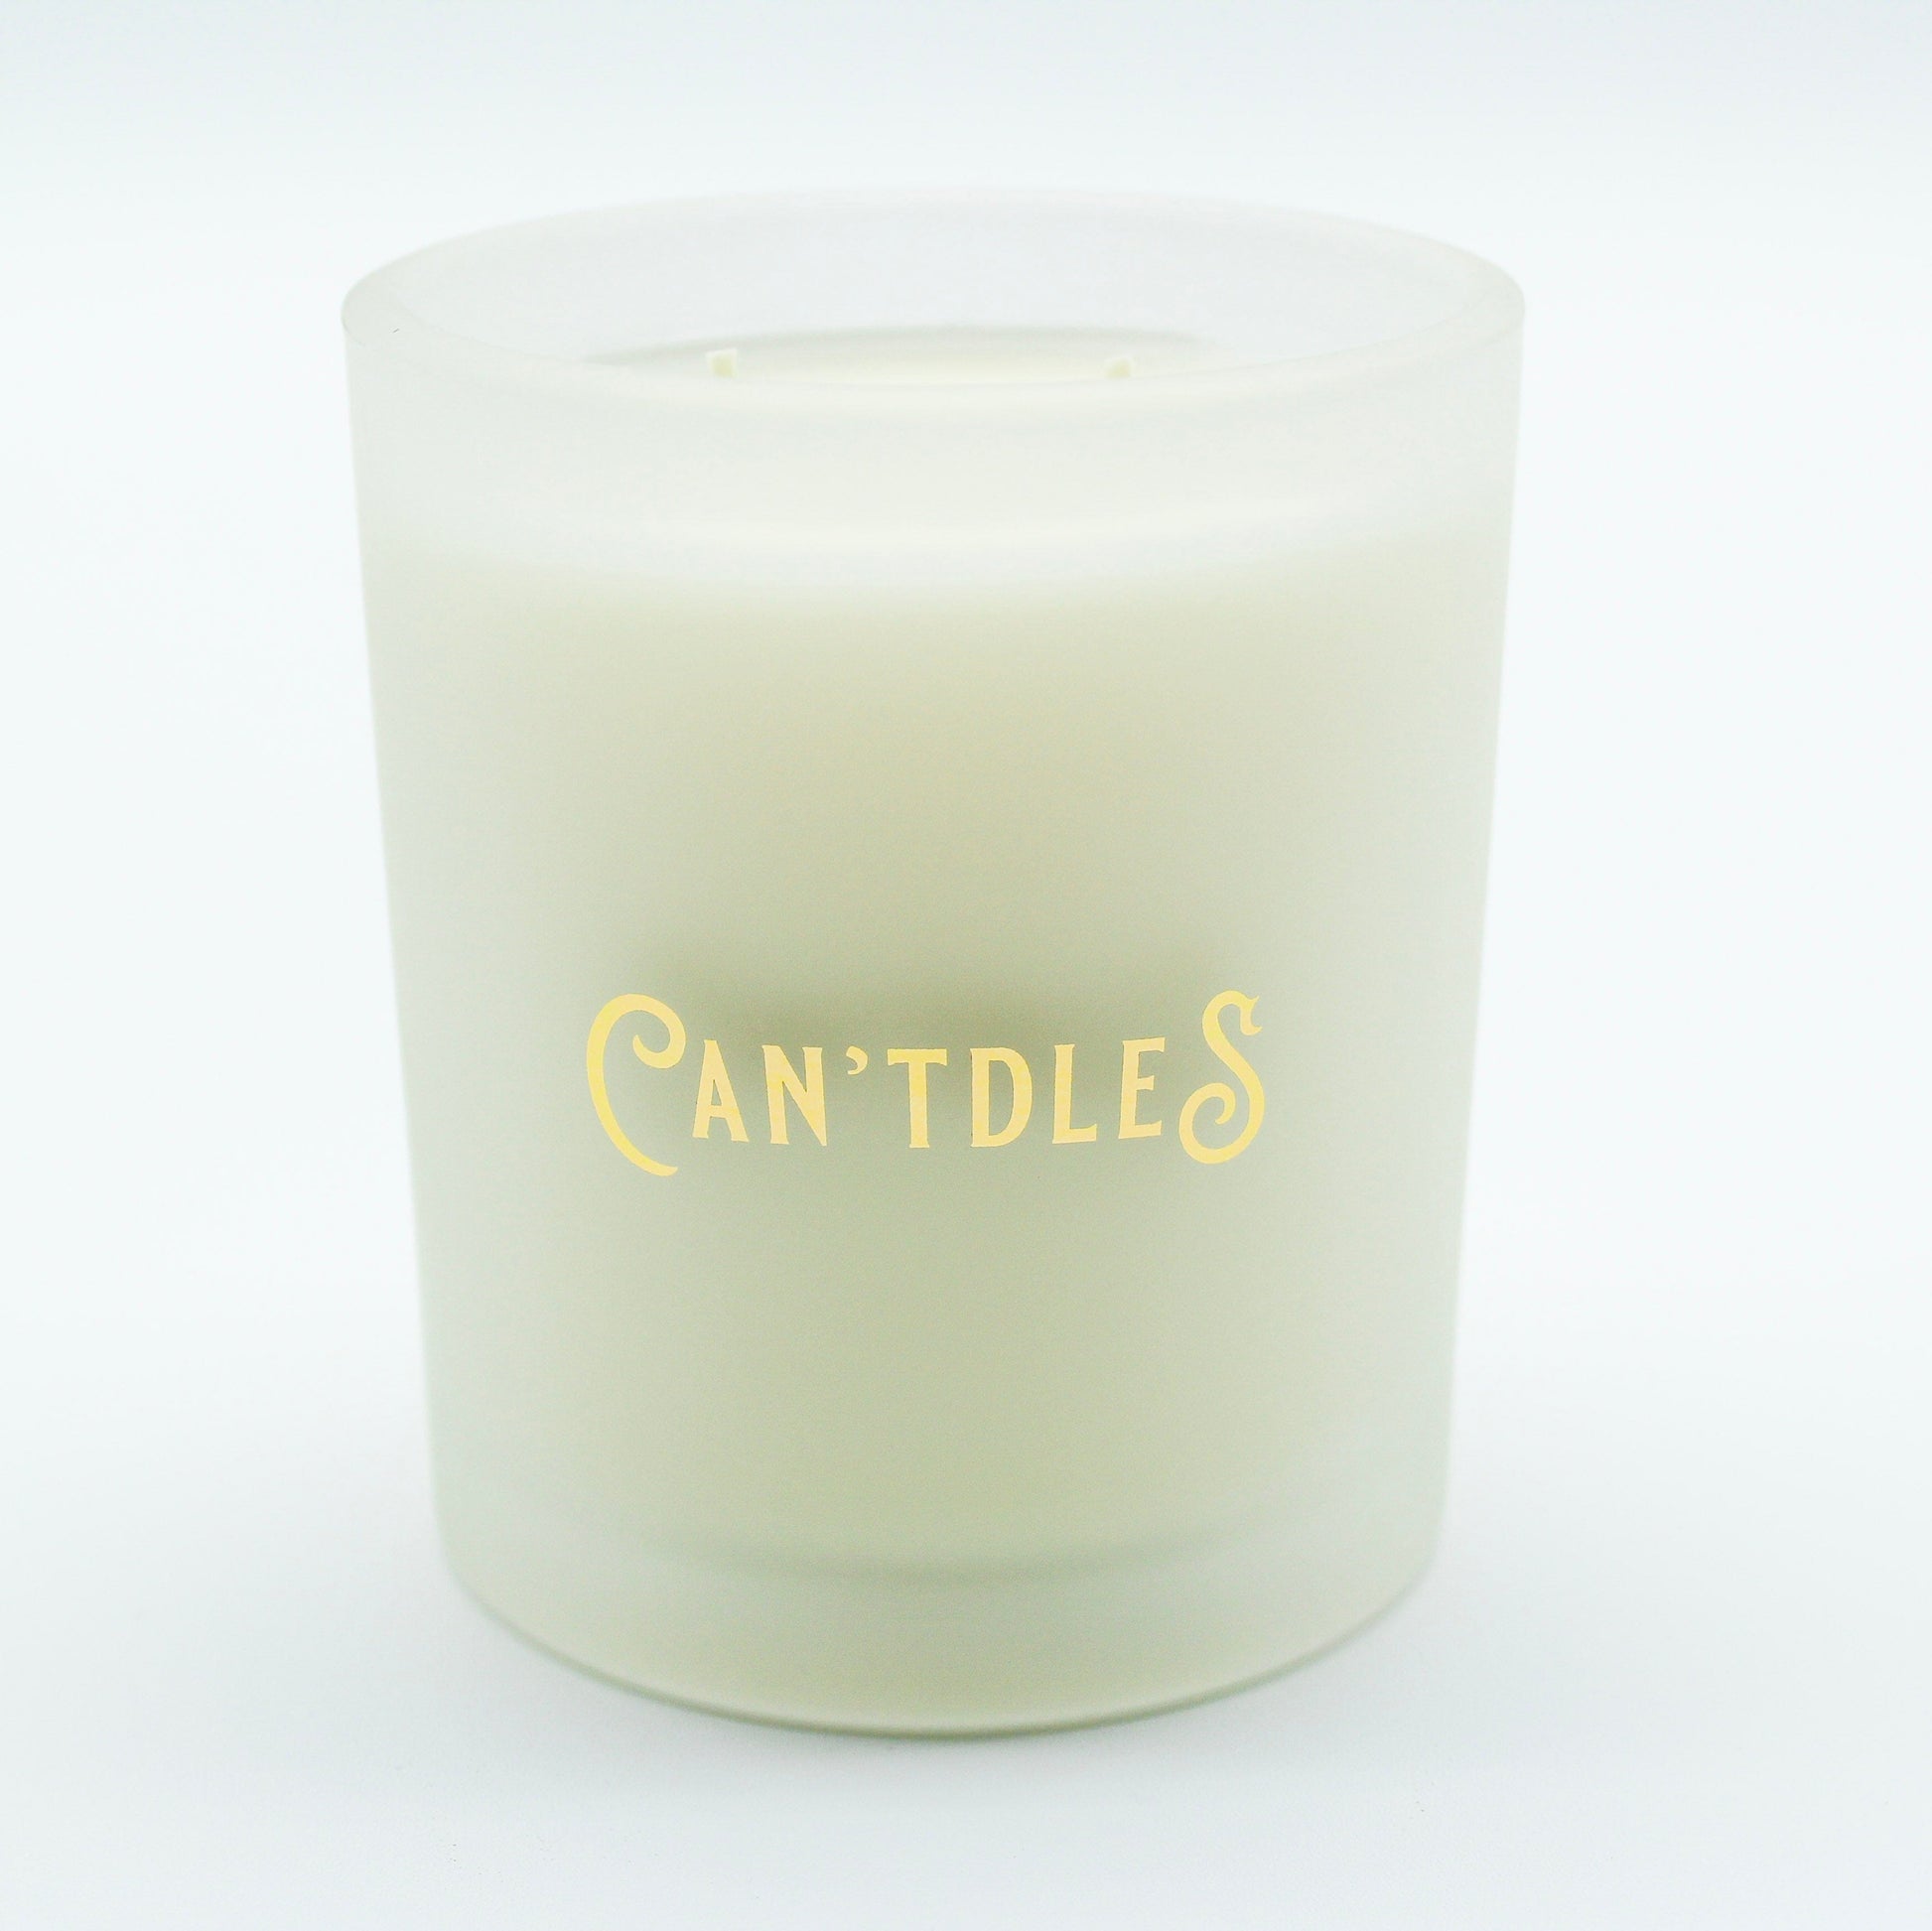 Can'tdles Candles Fra-jee-lee: Spruce, Citrus, Wine, Cinnamon